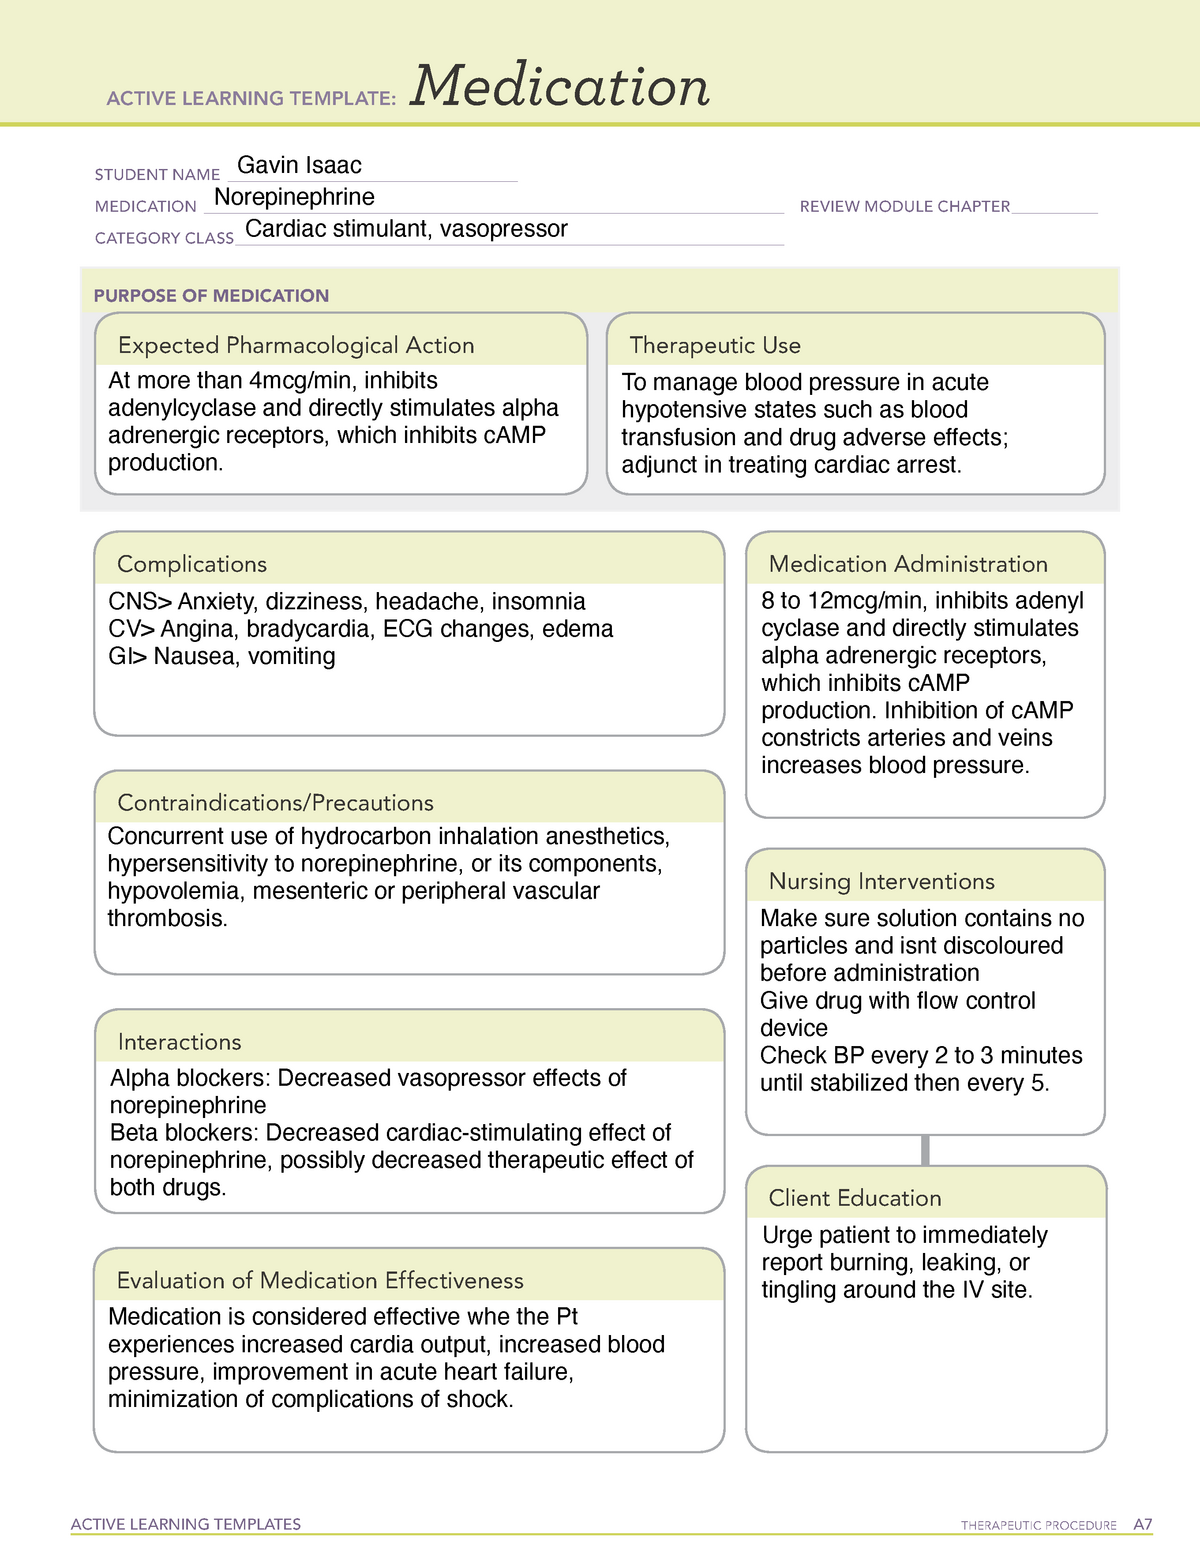 Medication Norepinephrine ACTIVE LEARNING TEMPLATES THERAPEUTIC